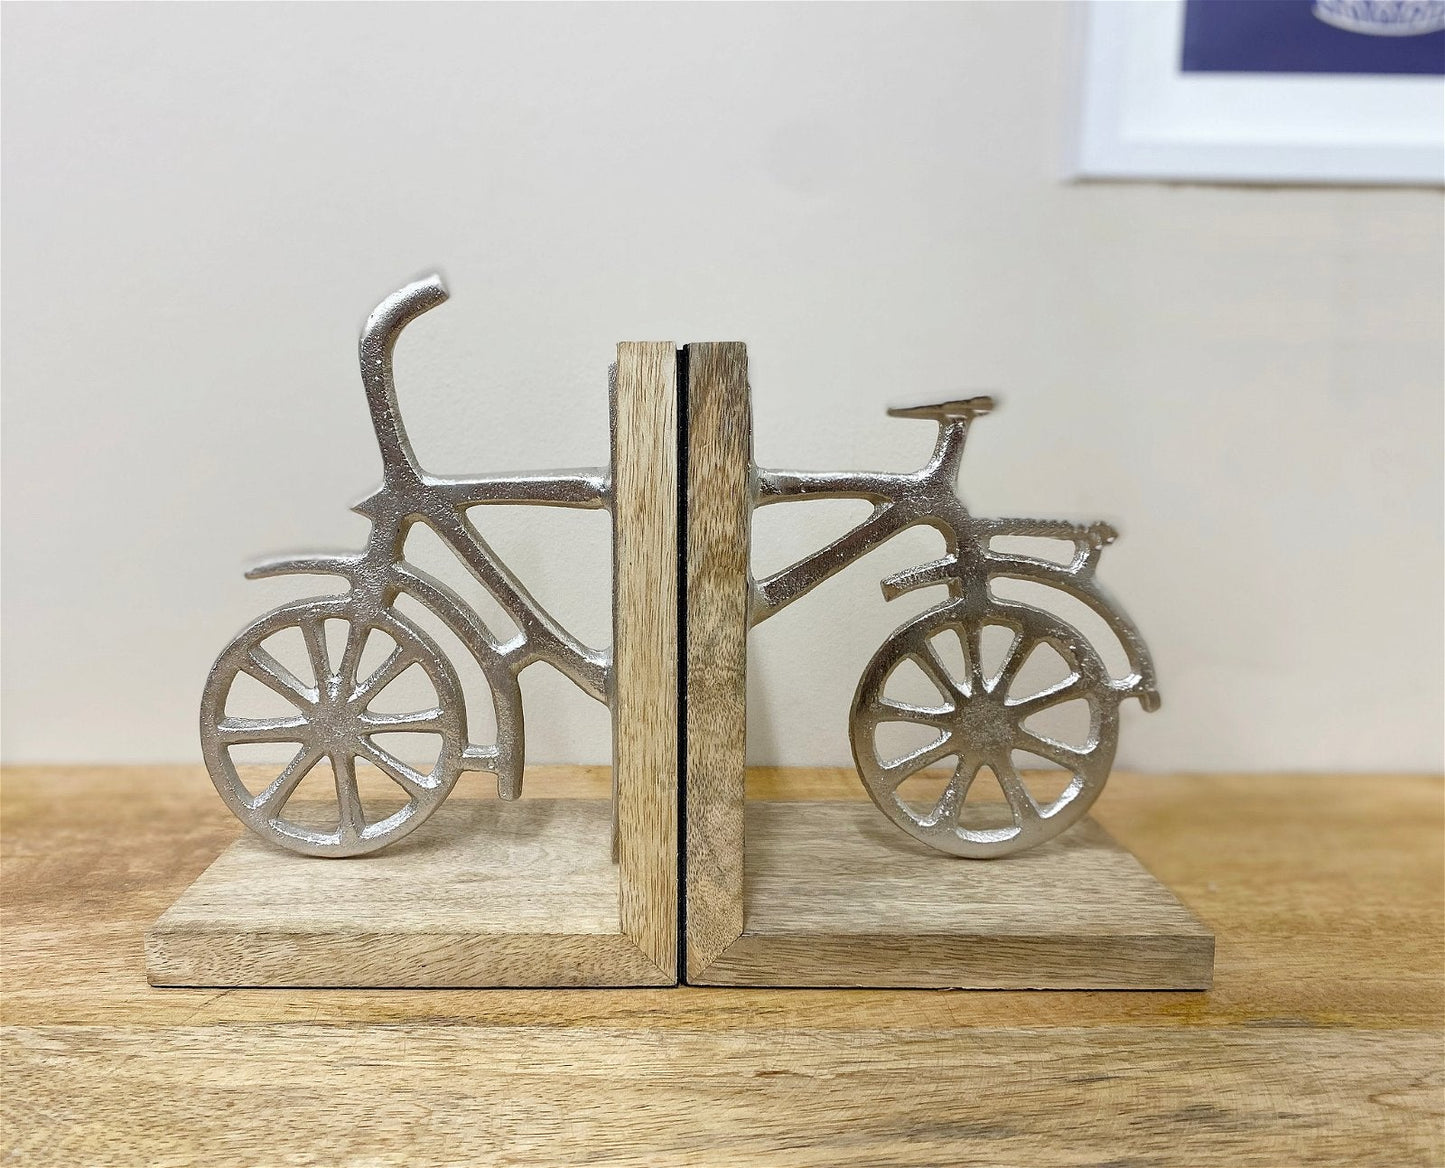 BICYCLE BOOKENDS BOOKENDS from Eleanoras